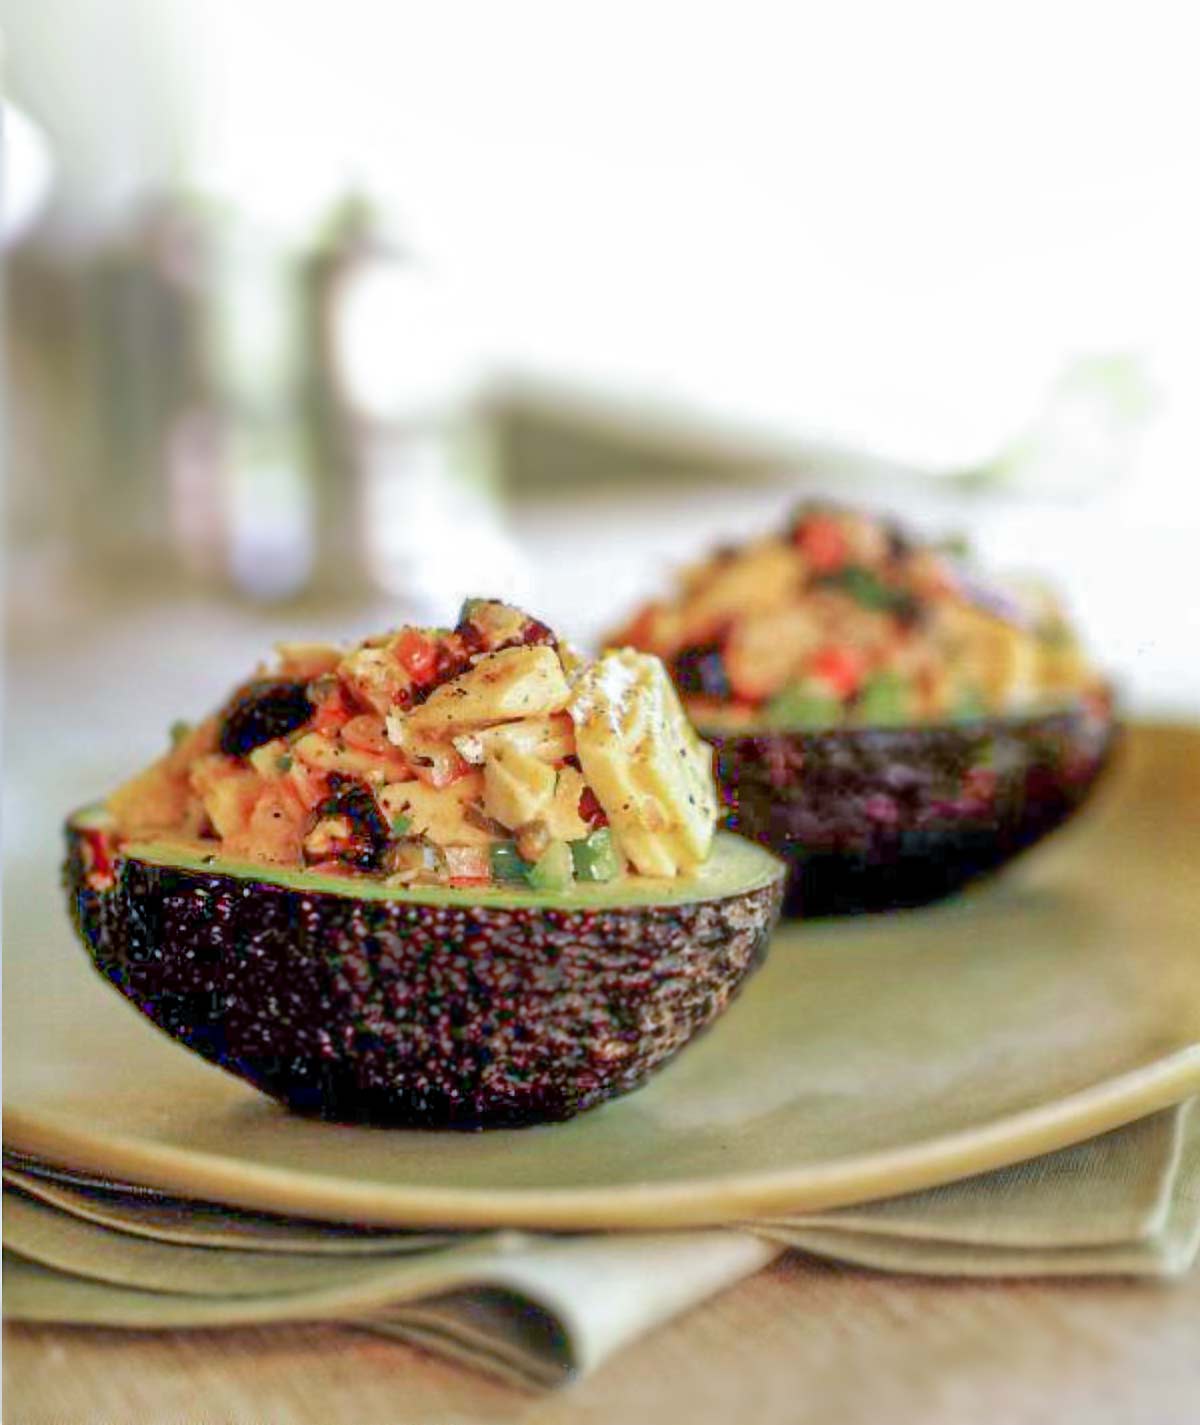 Two avocado halves filled with fresh tuna with dry-cured black olives.